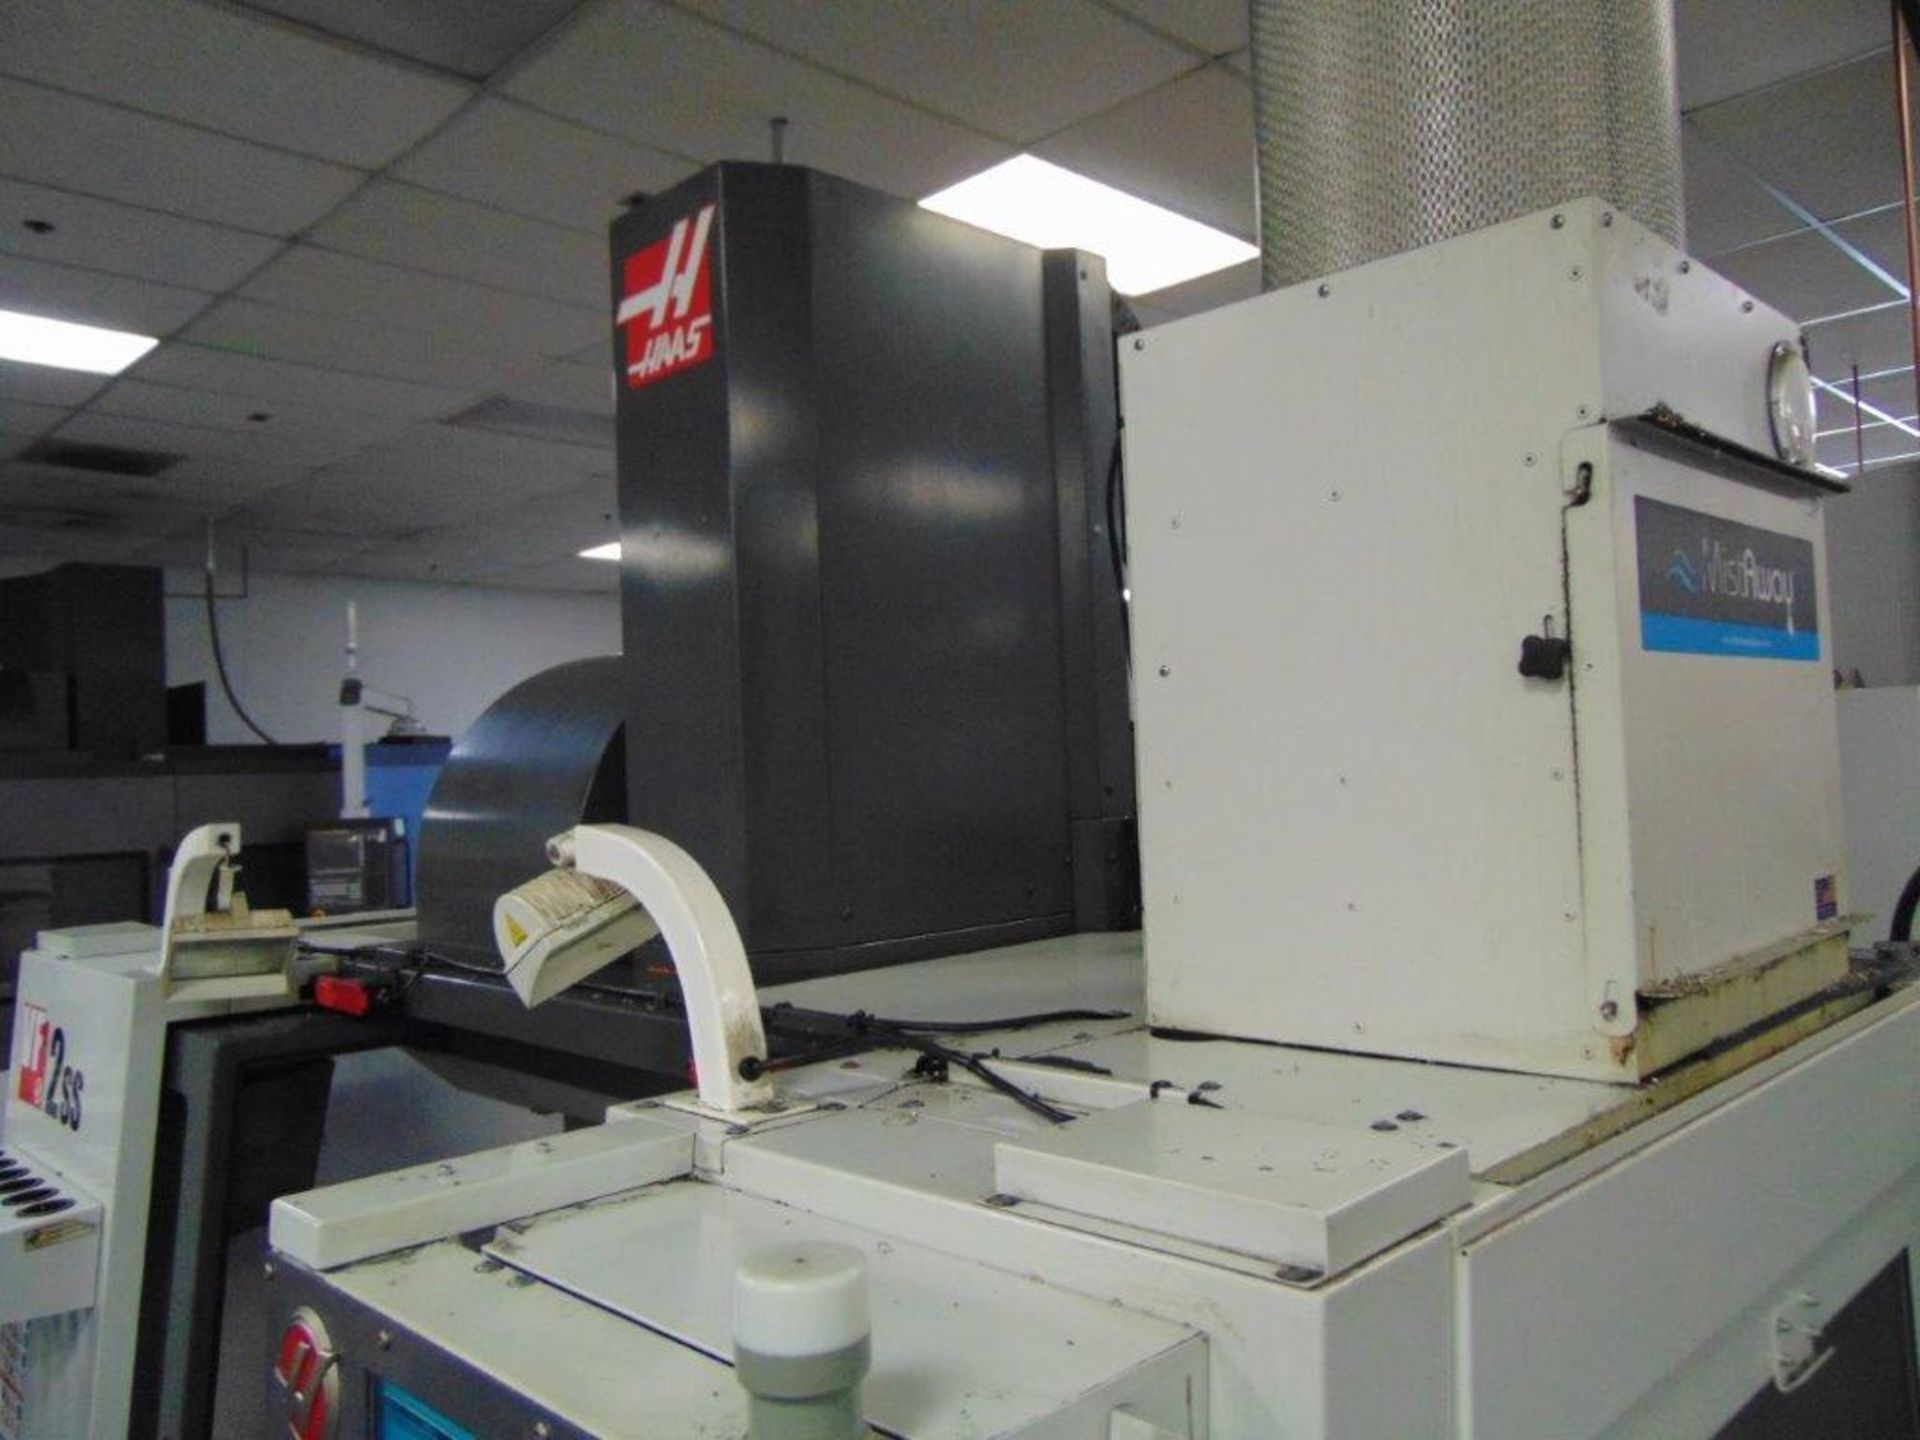 2012 HAAS VF-2SS CNC VERTICAL MACHINING CENTER, S/N 1097466, 30" x 16" x 20"TRAVELS, 30HP, 12,000RPM - Image 8 of 11